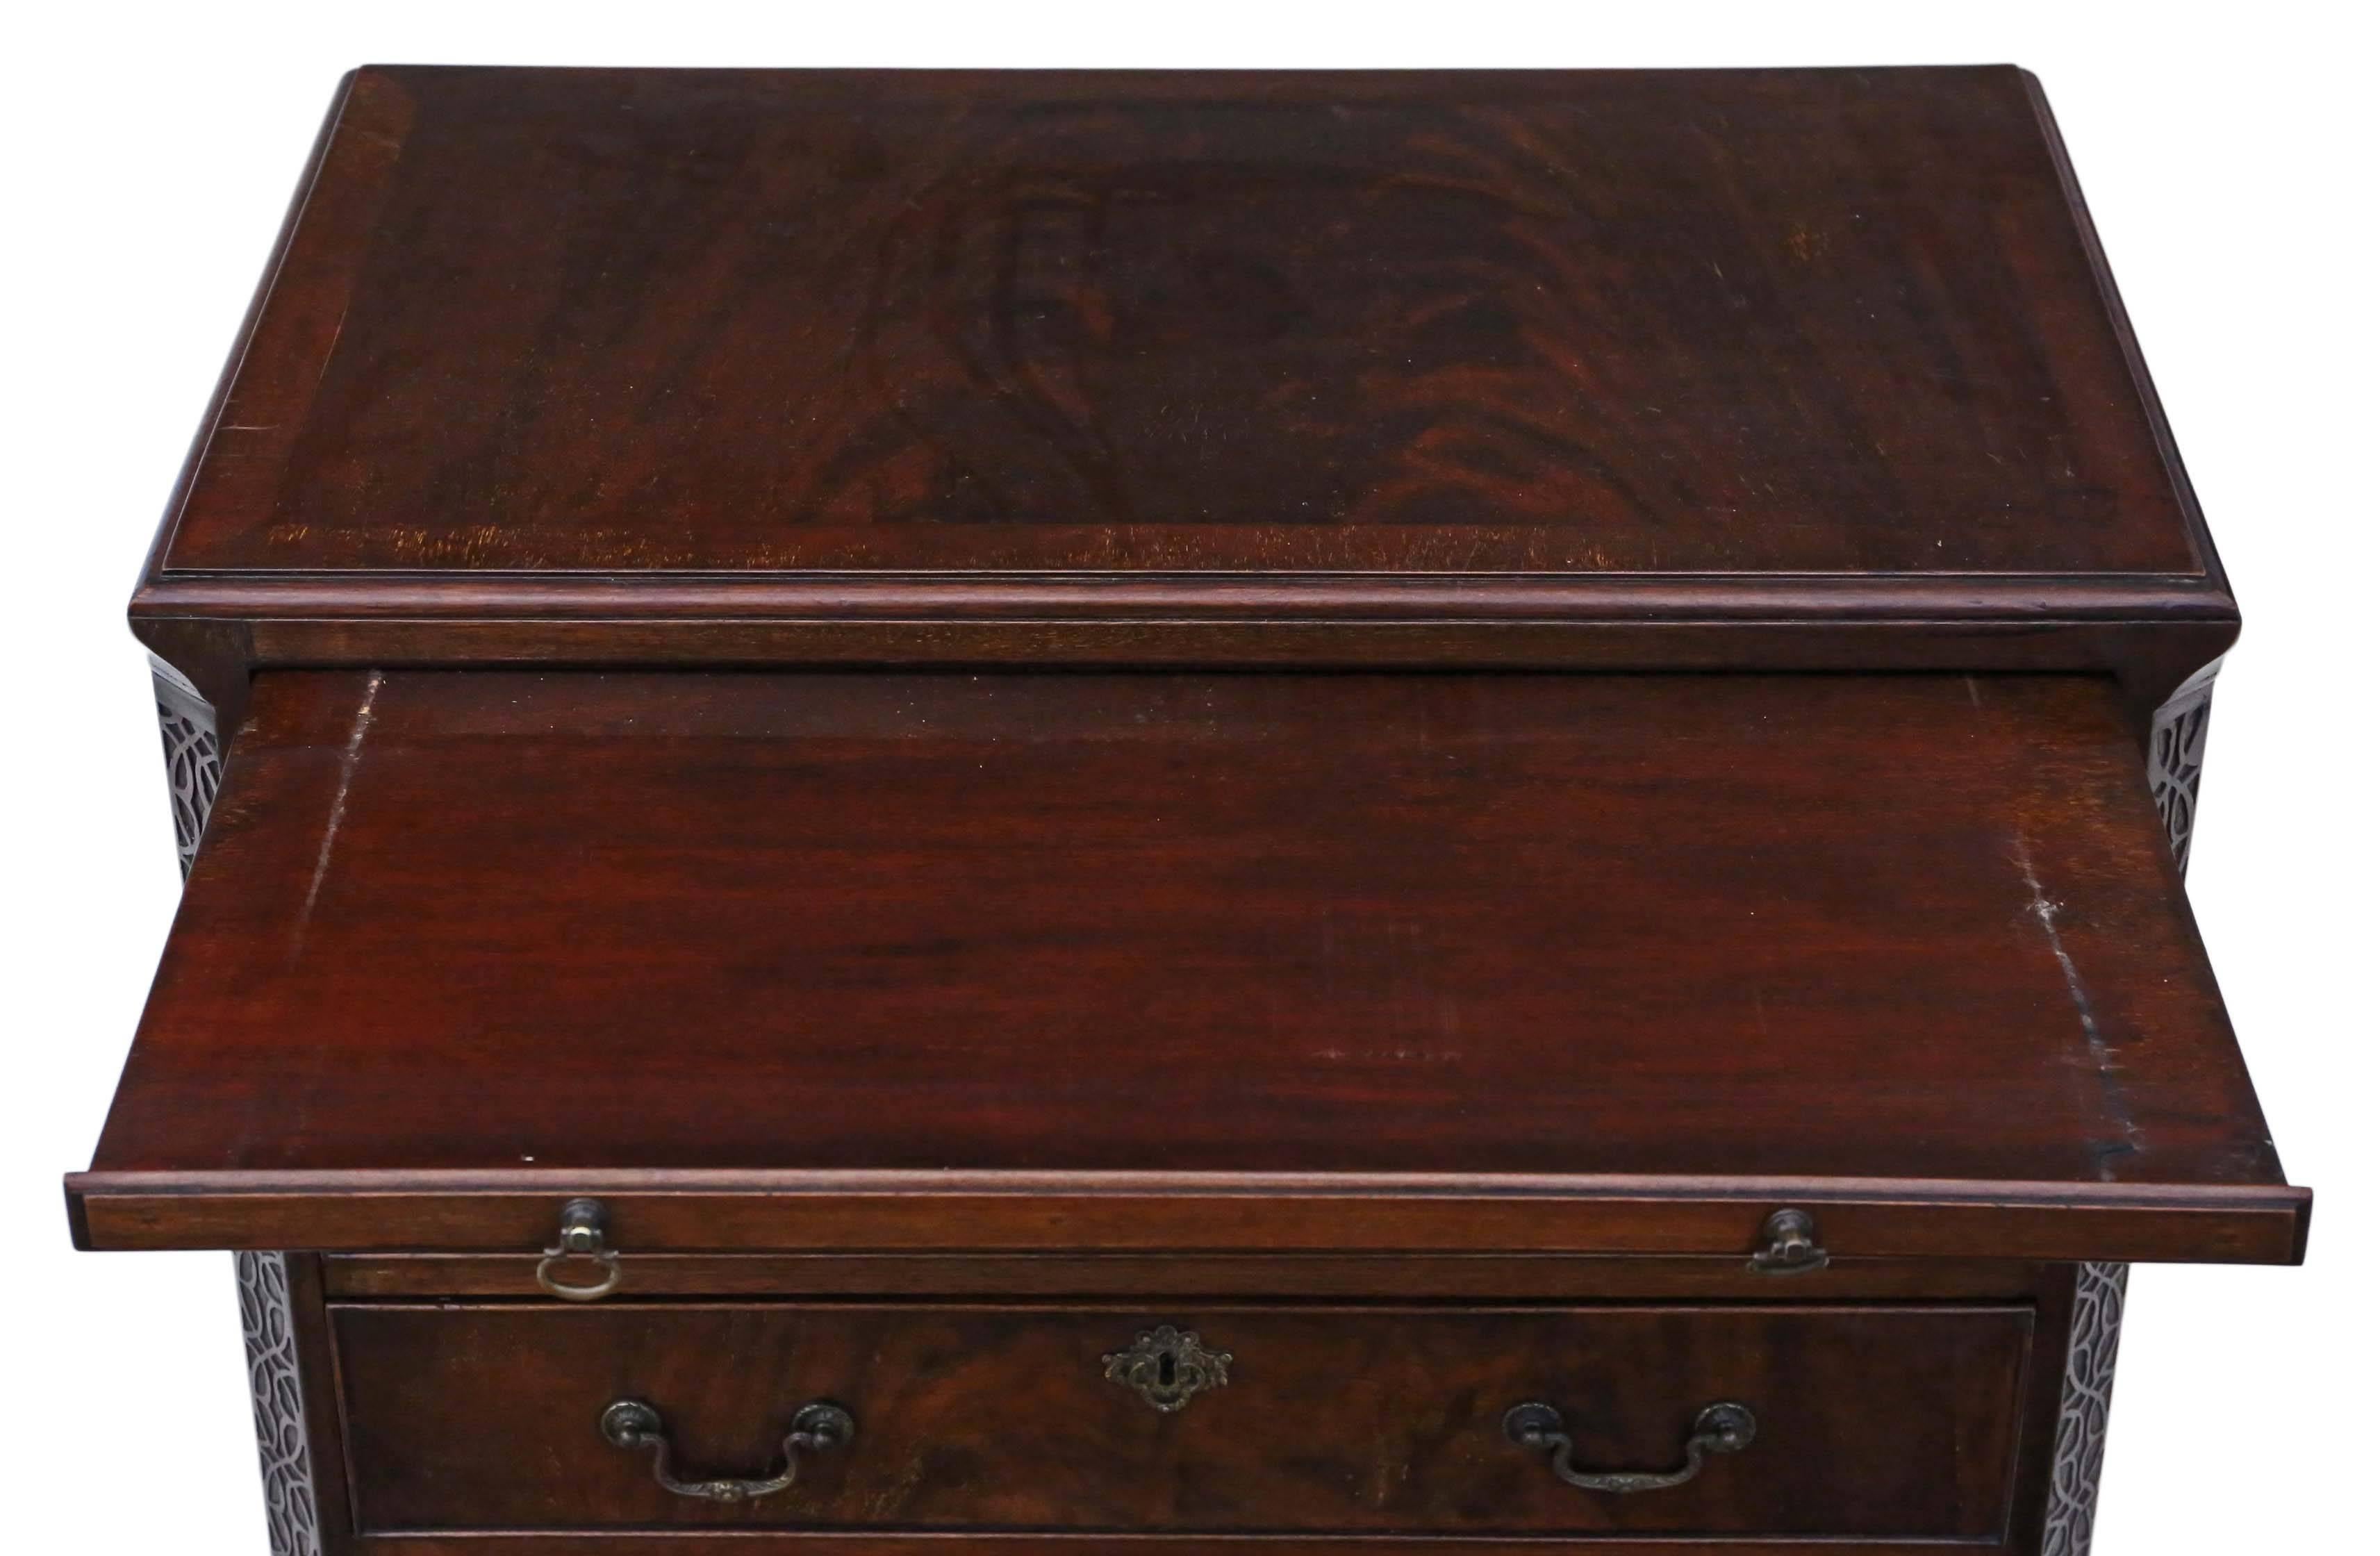 British Antique Quality Small Georgian Revival, circa 1910 Mahogany Chest of Drawers For Sale